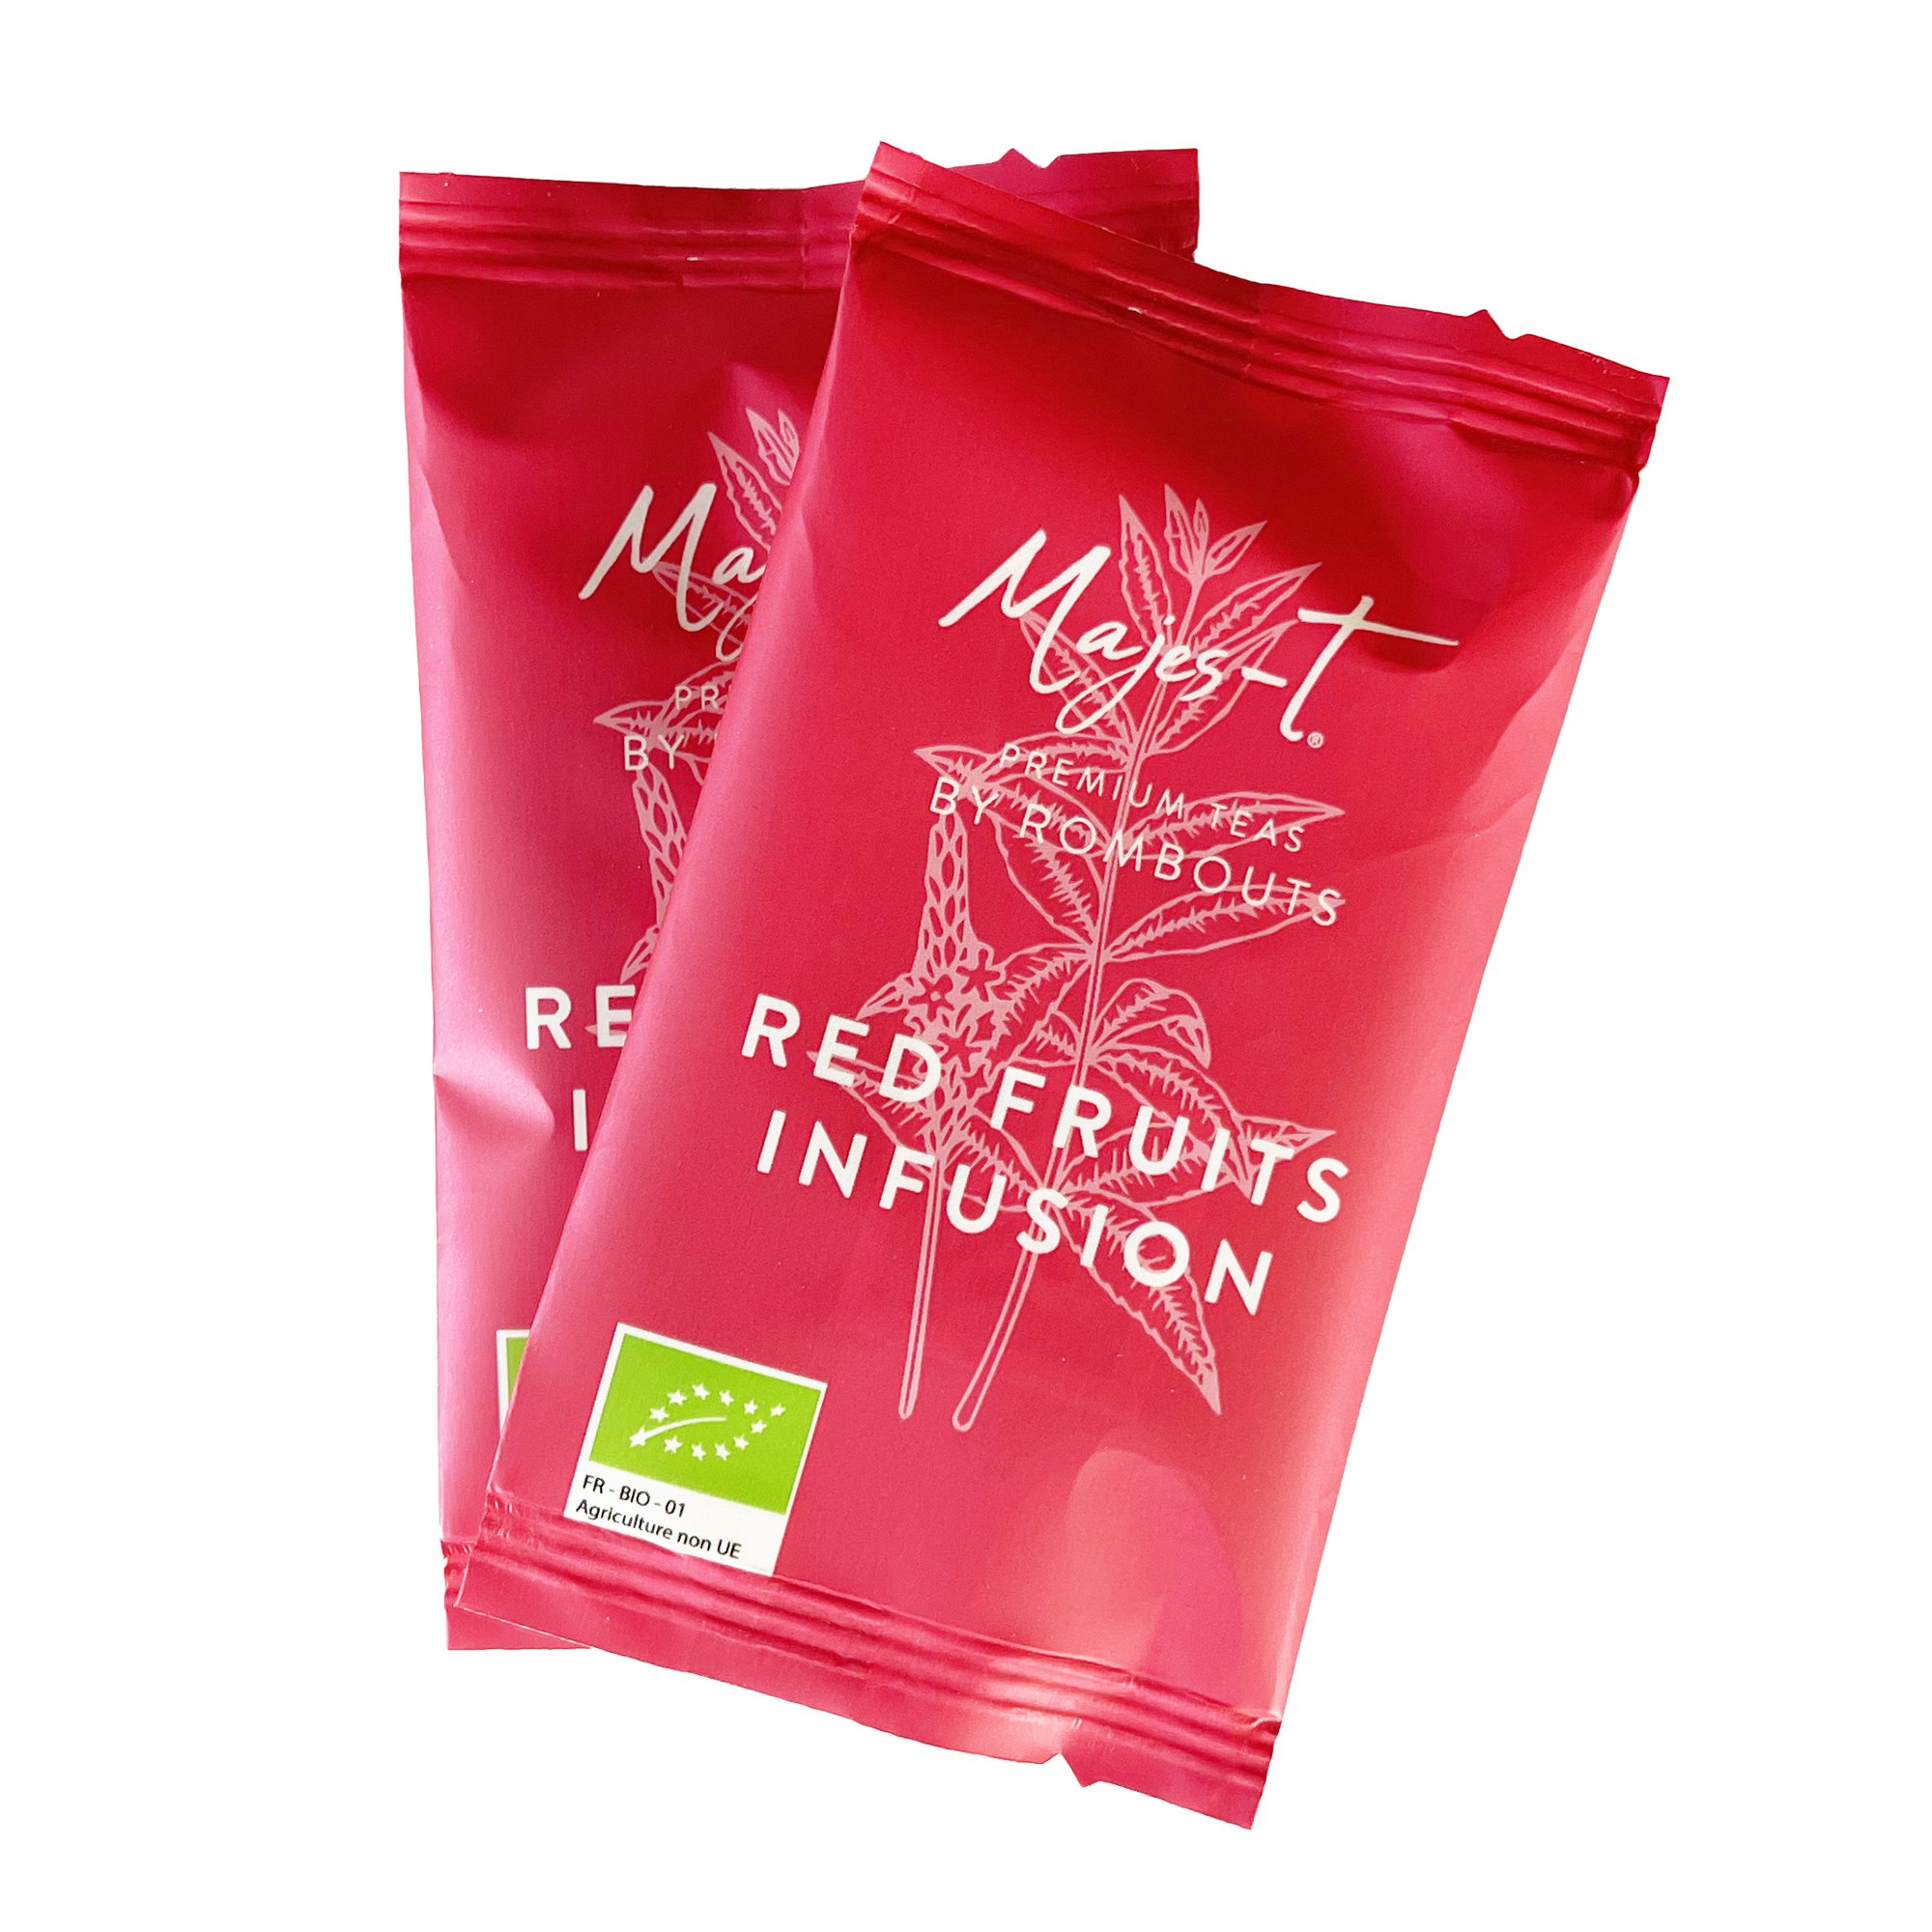 Majes-T Red Fruits Infusion 50pcs